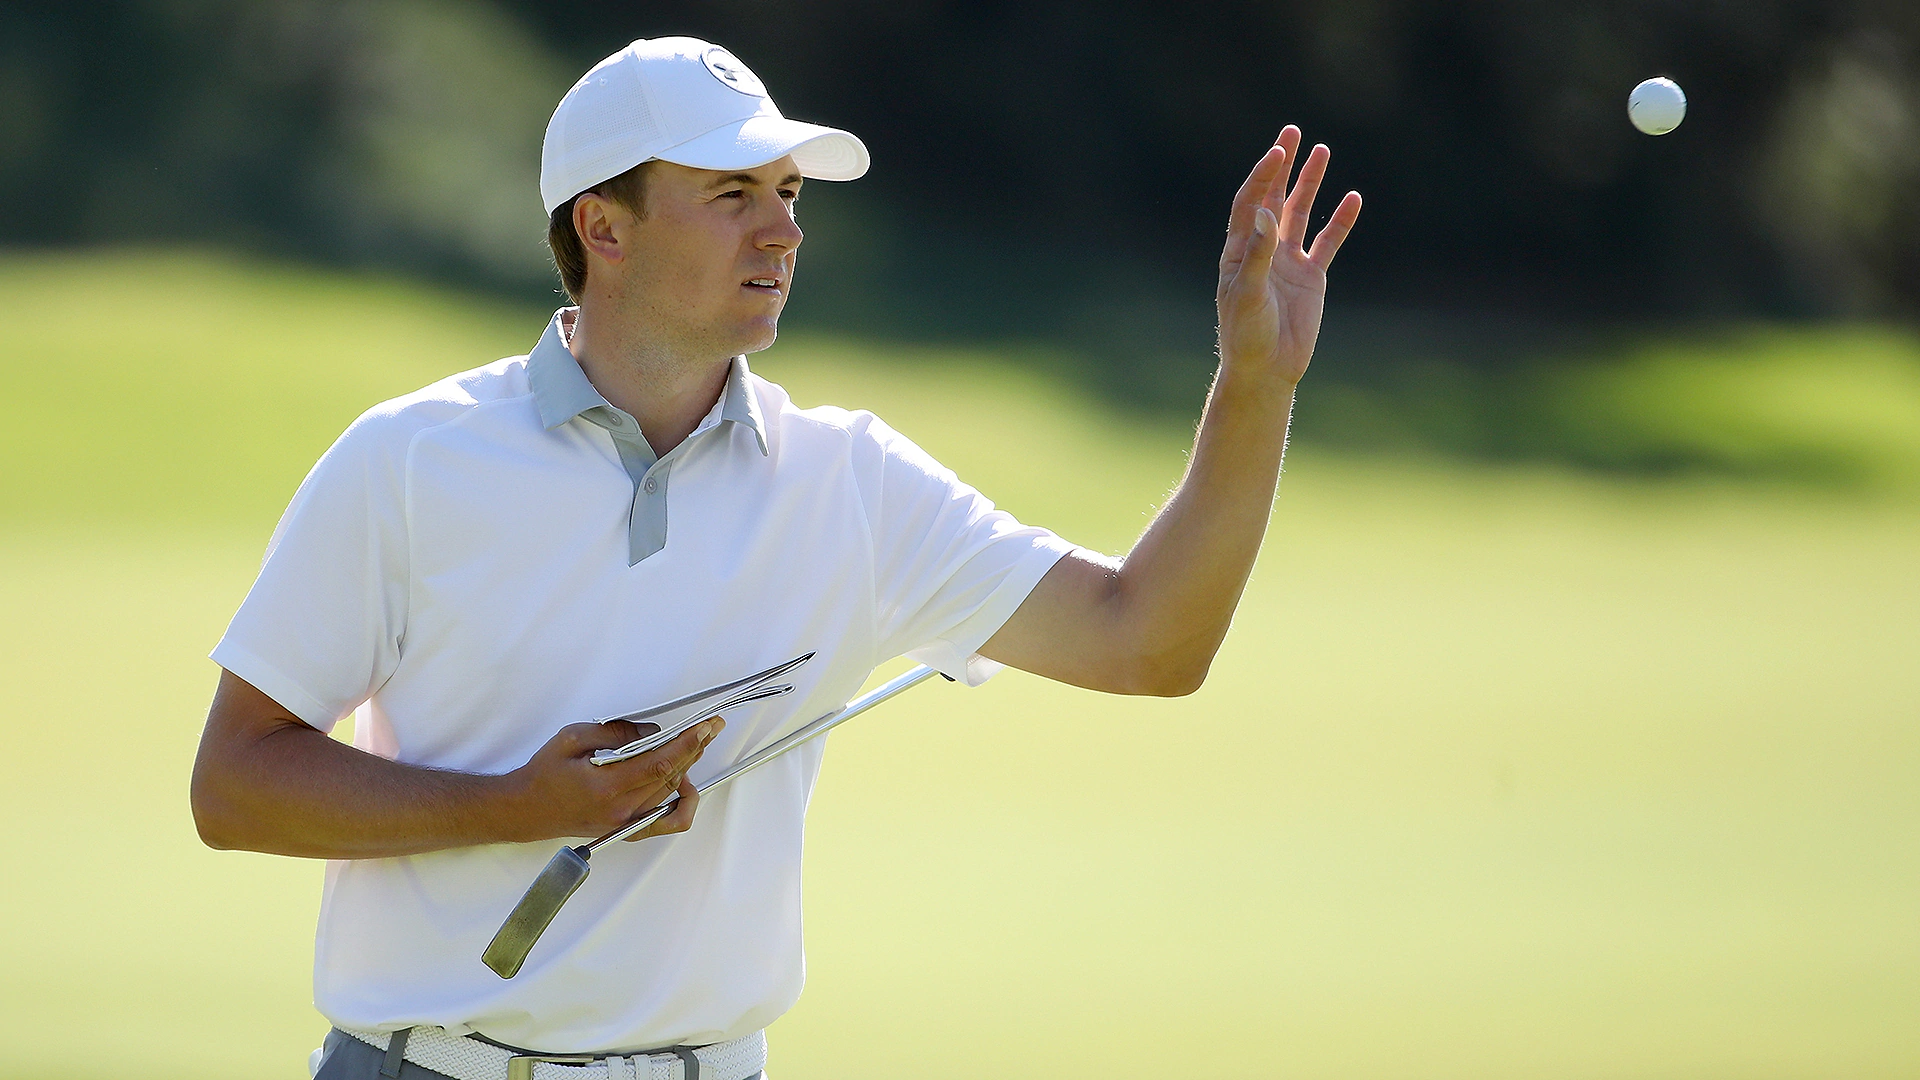 Spieth: 'I feel great about the state of my game'